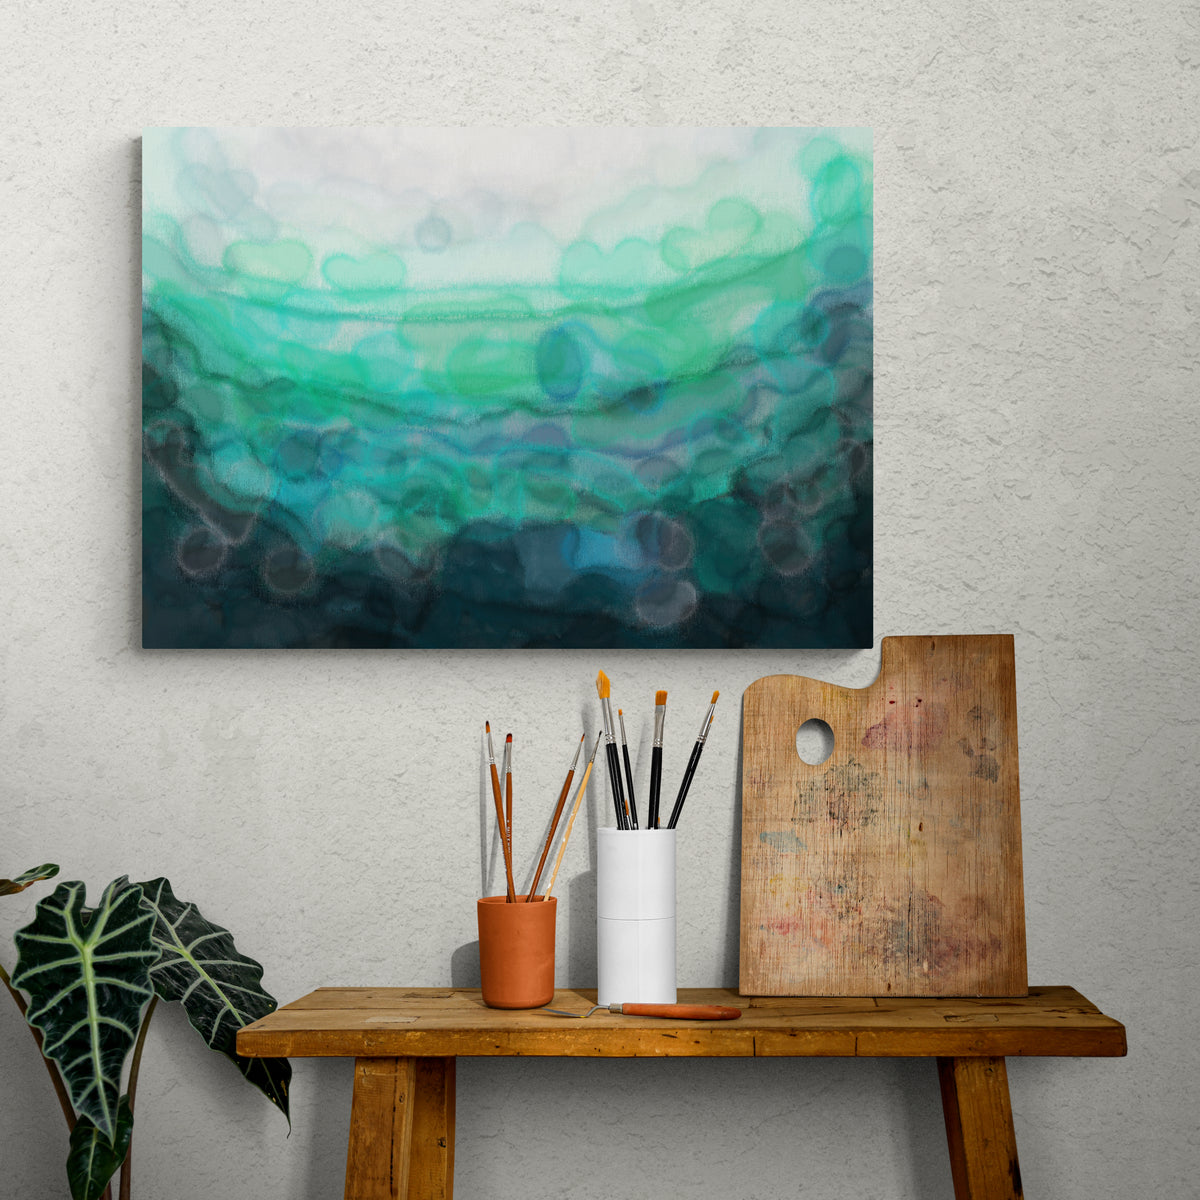 Wall Art | Louise Mead | Teal Serenity Abstract Soothing Canvas Print from Louise Mead.  Teal minimalist watercolour fluid art monochrome ombre canvas print.